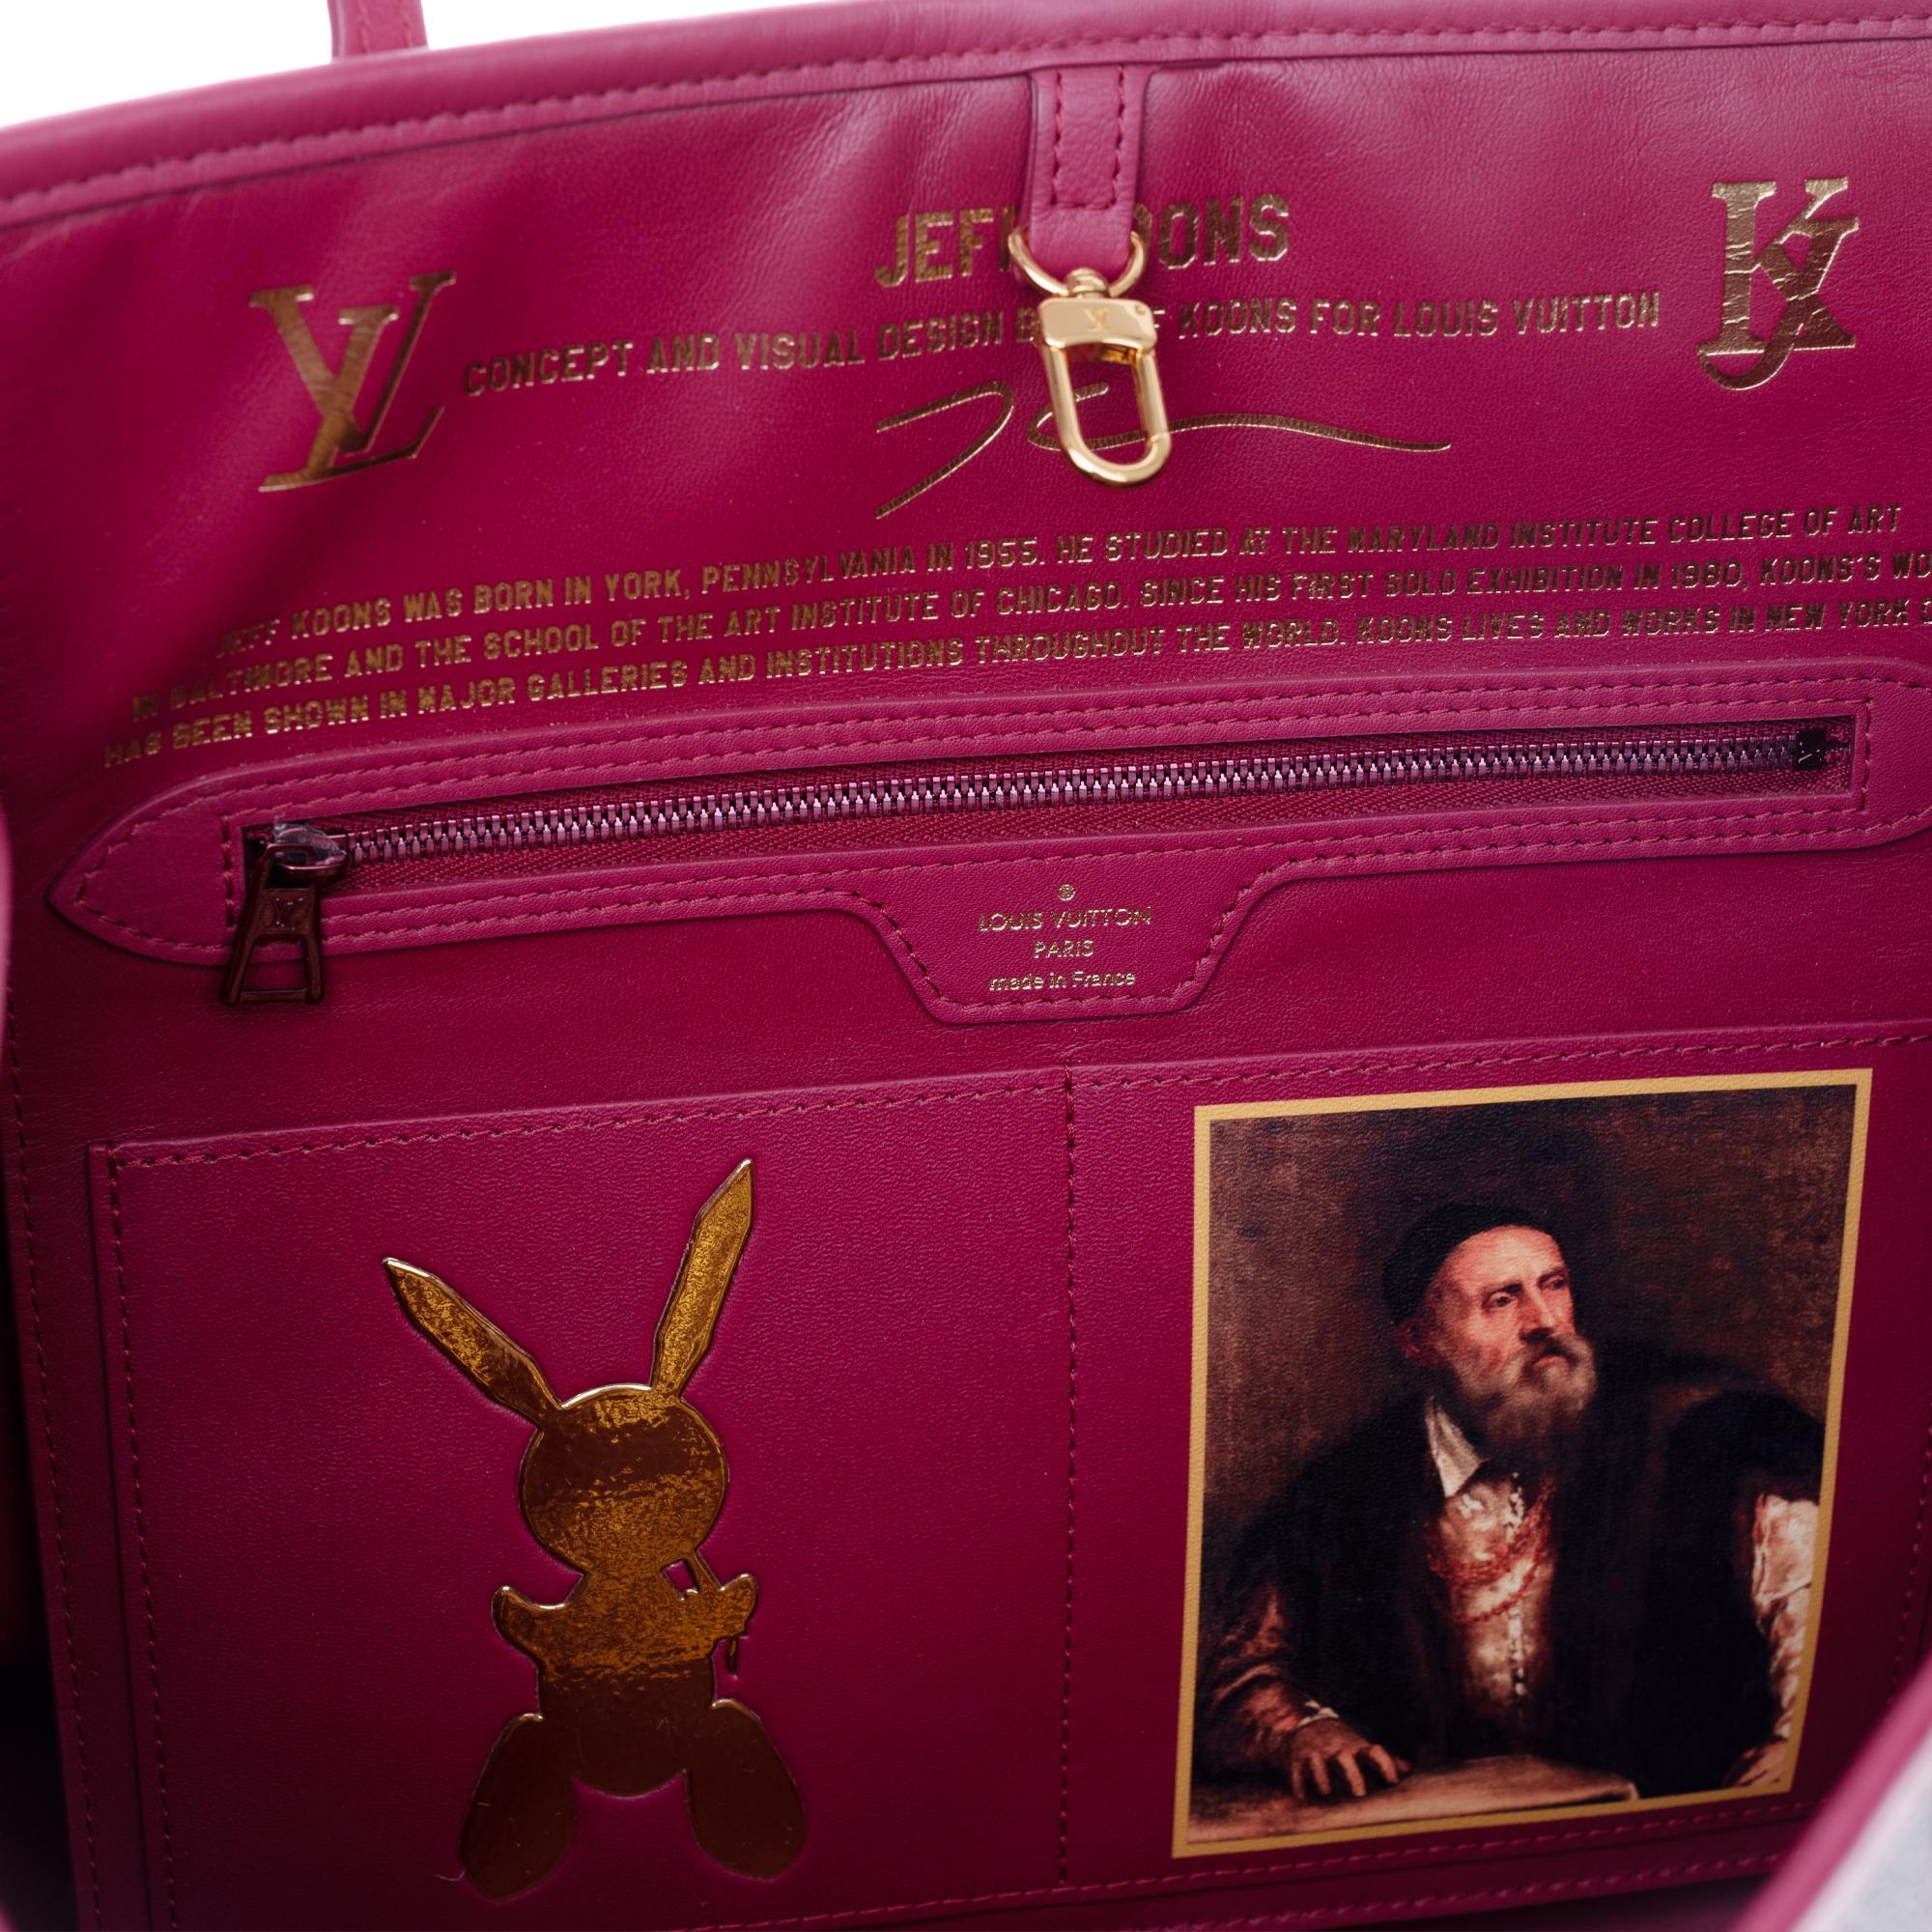 Louis Vuitton Neverfull handbag limited edition  Titian by Jeff Koons  11